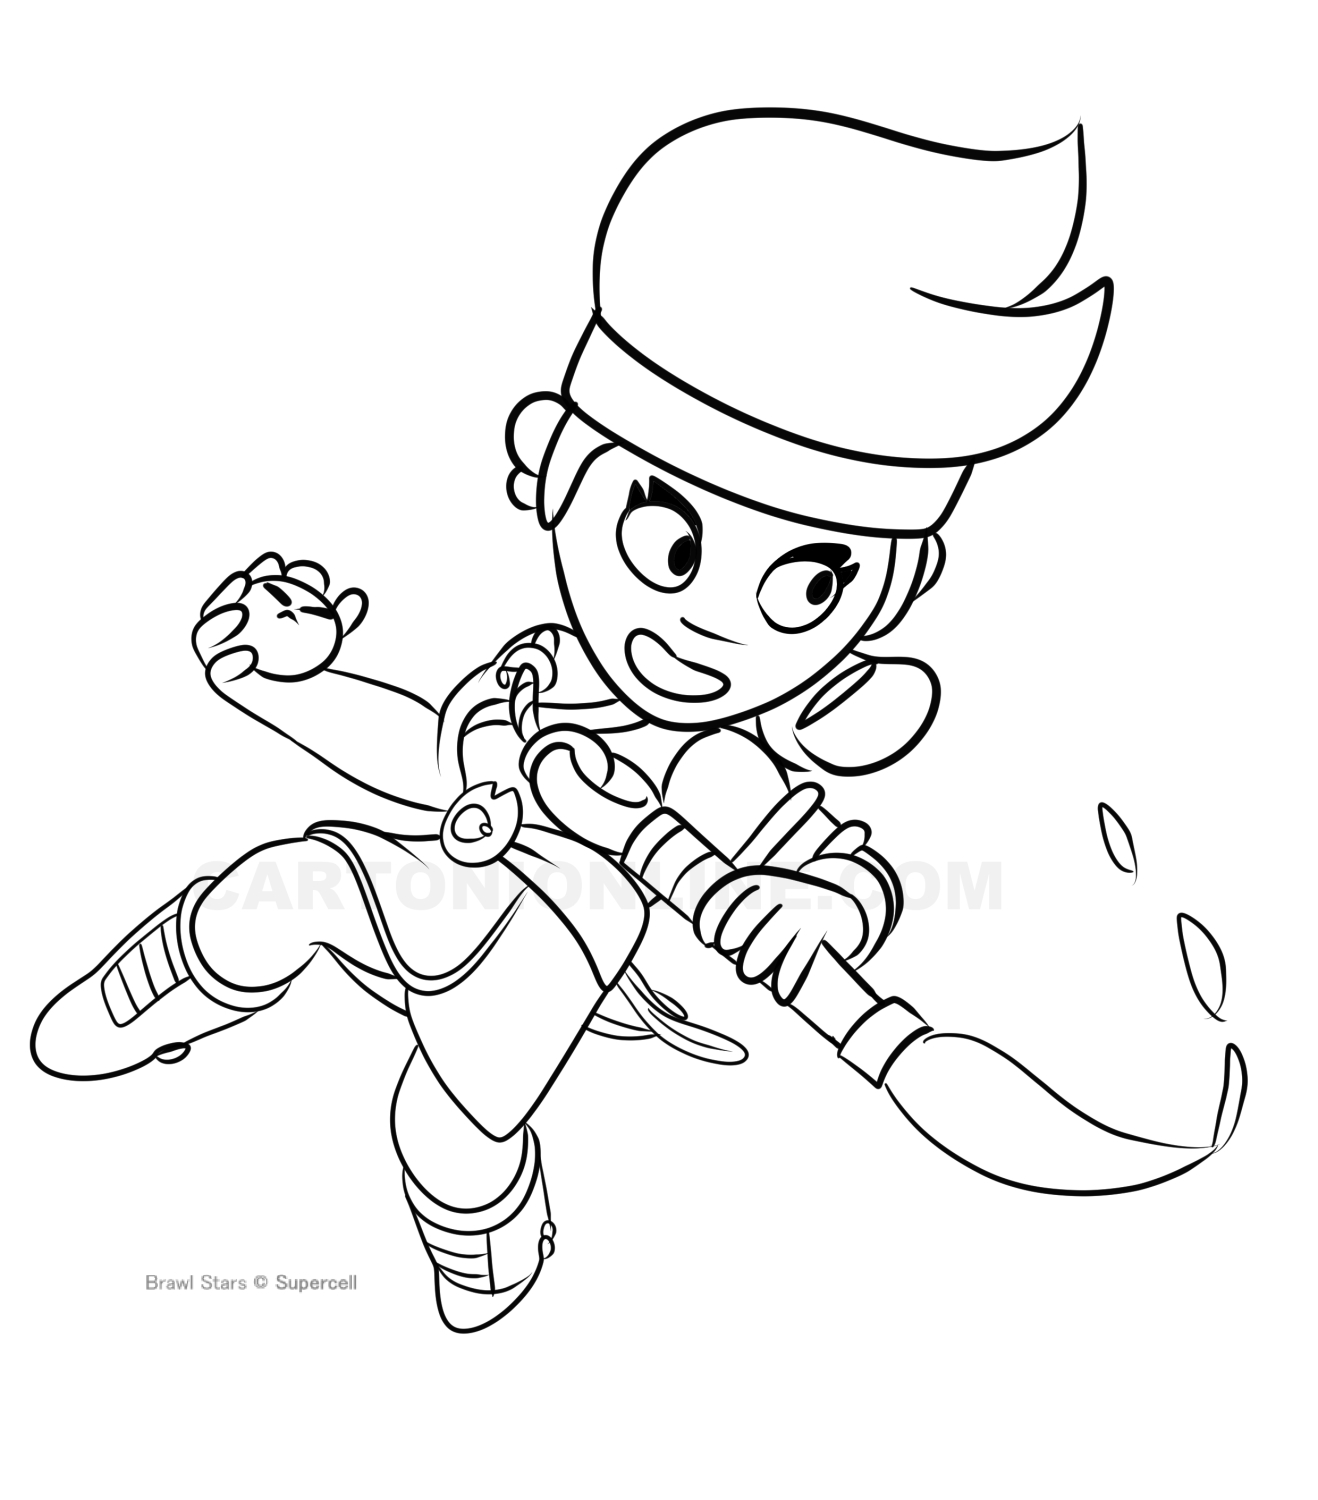 Amber 04 Brawl Stars coloring page to print and coloring